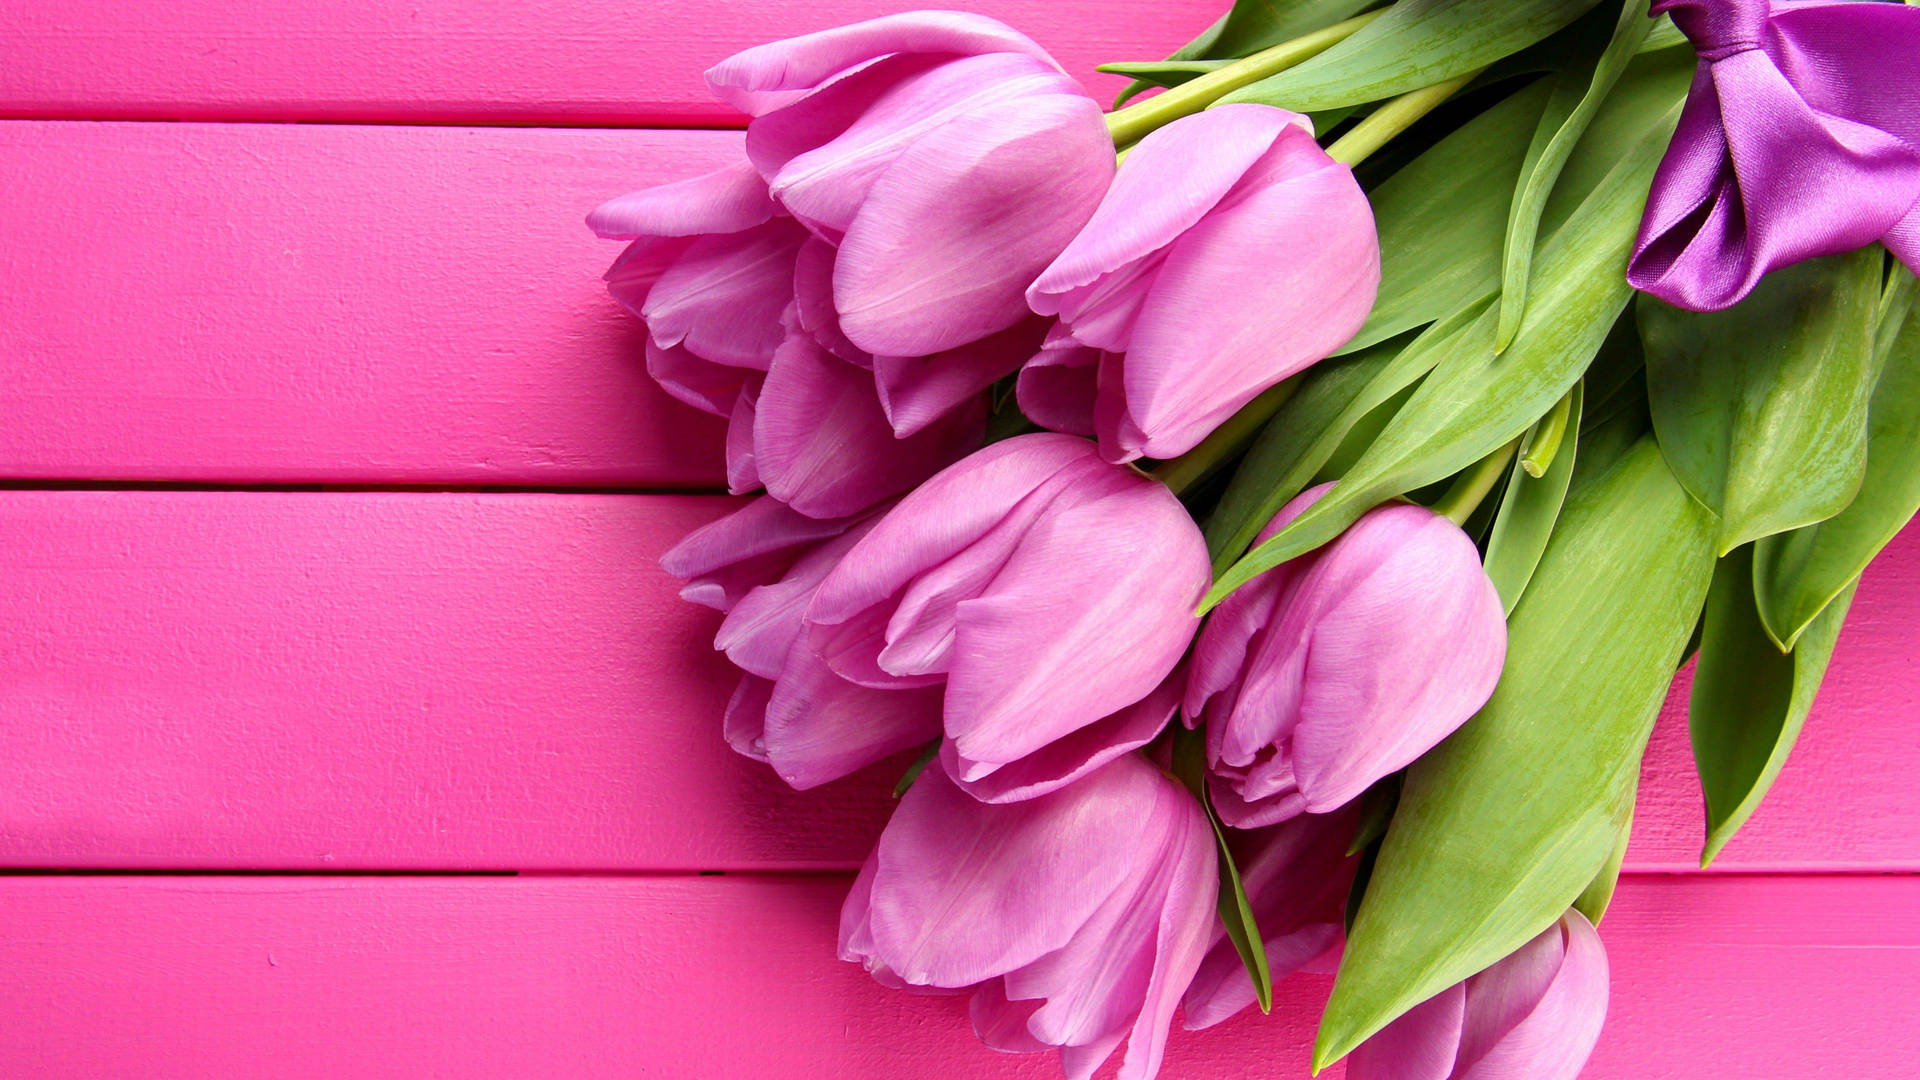 Cute Pink Flower Of Tulips On Plank